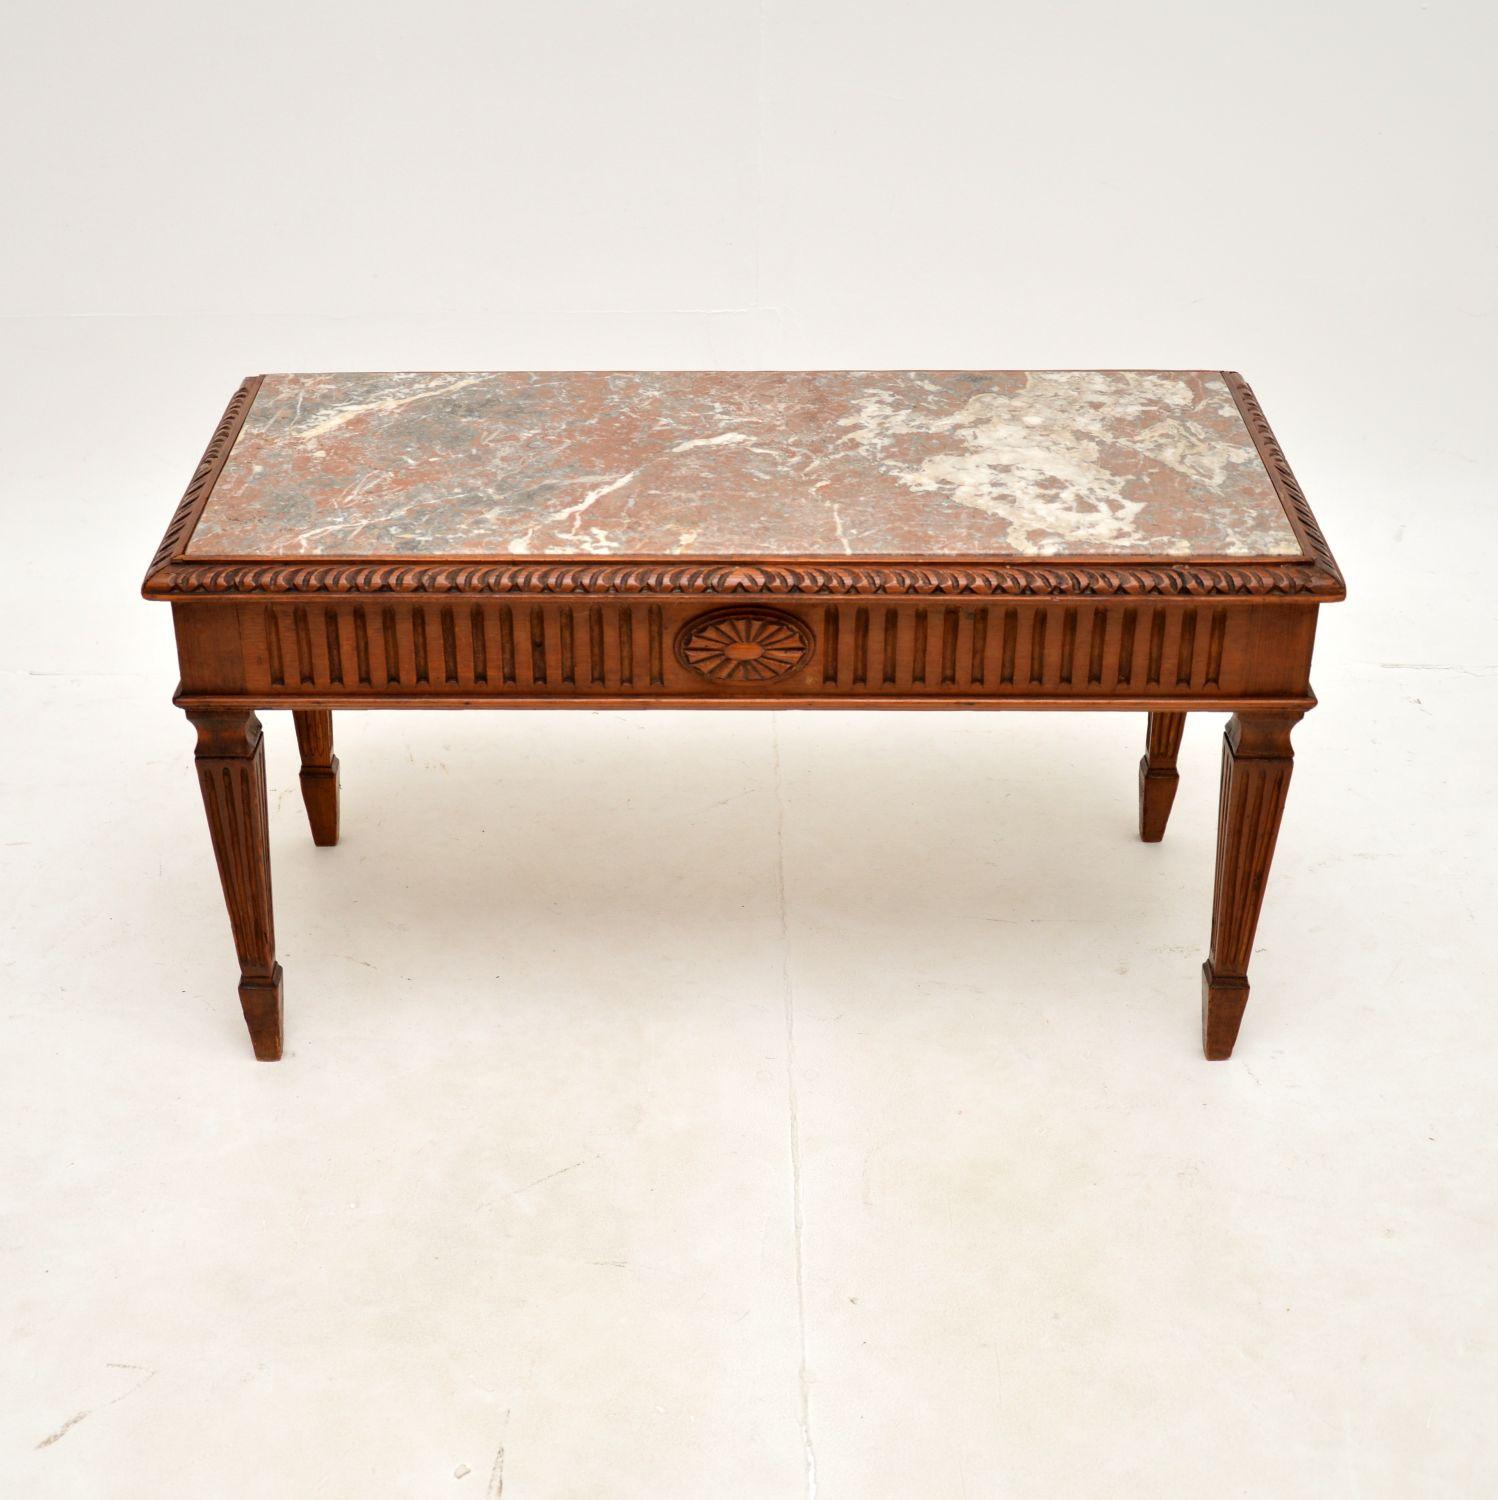 A beautiful antique French marble top coffee table in carved pine. This was made in England, it dates from around the 1900-1910 period.

The quality is outstanding, the solid pine frame is beautifully carved, sturdy and sound, with a gorgeous